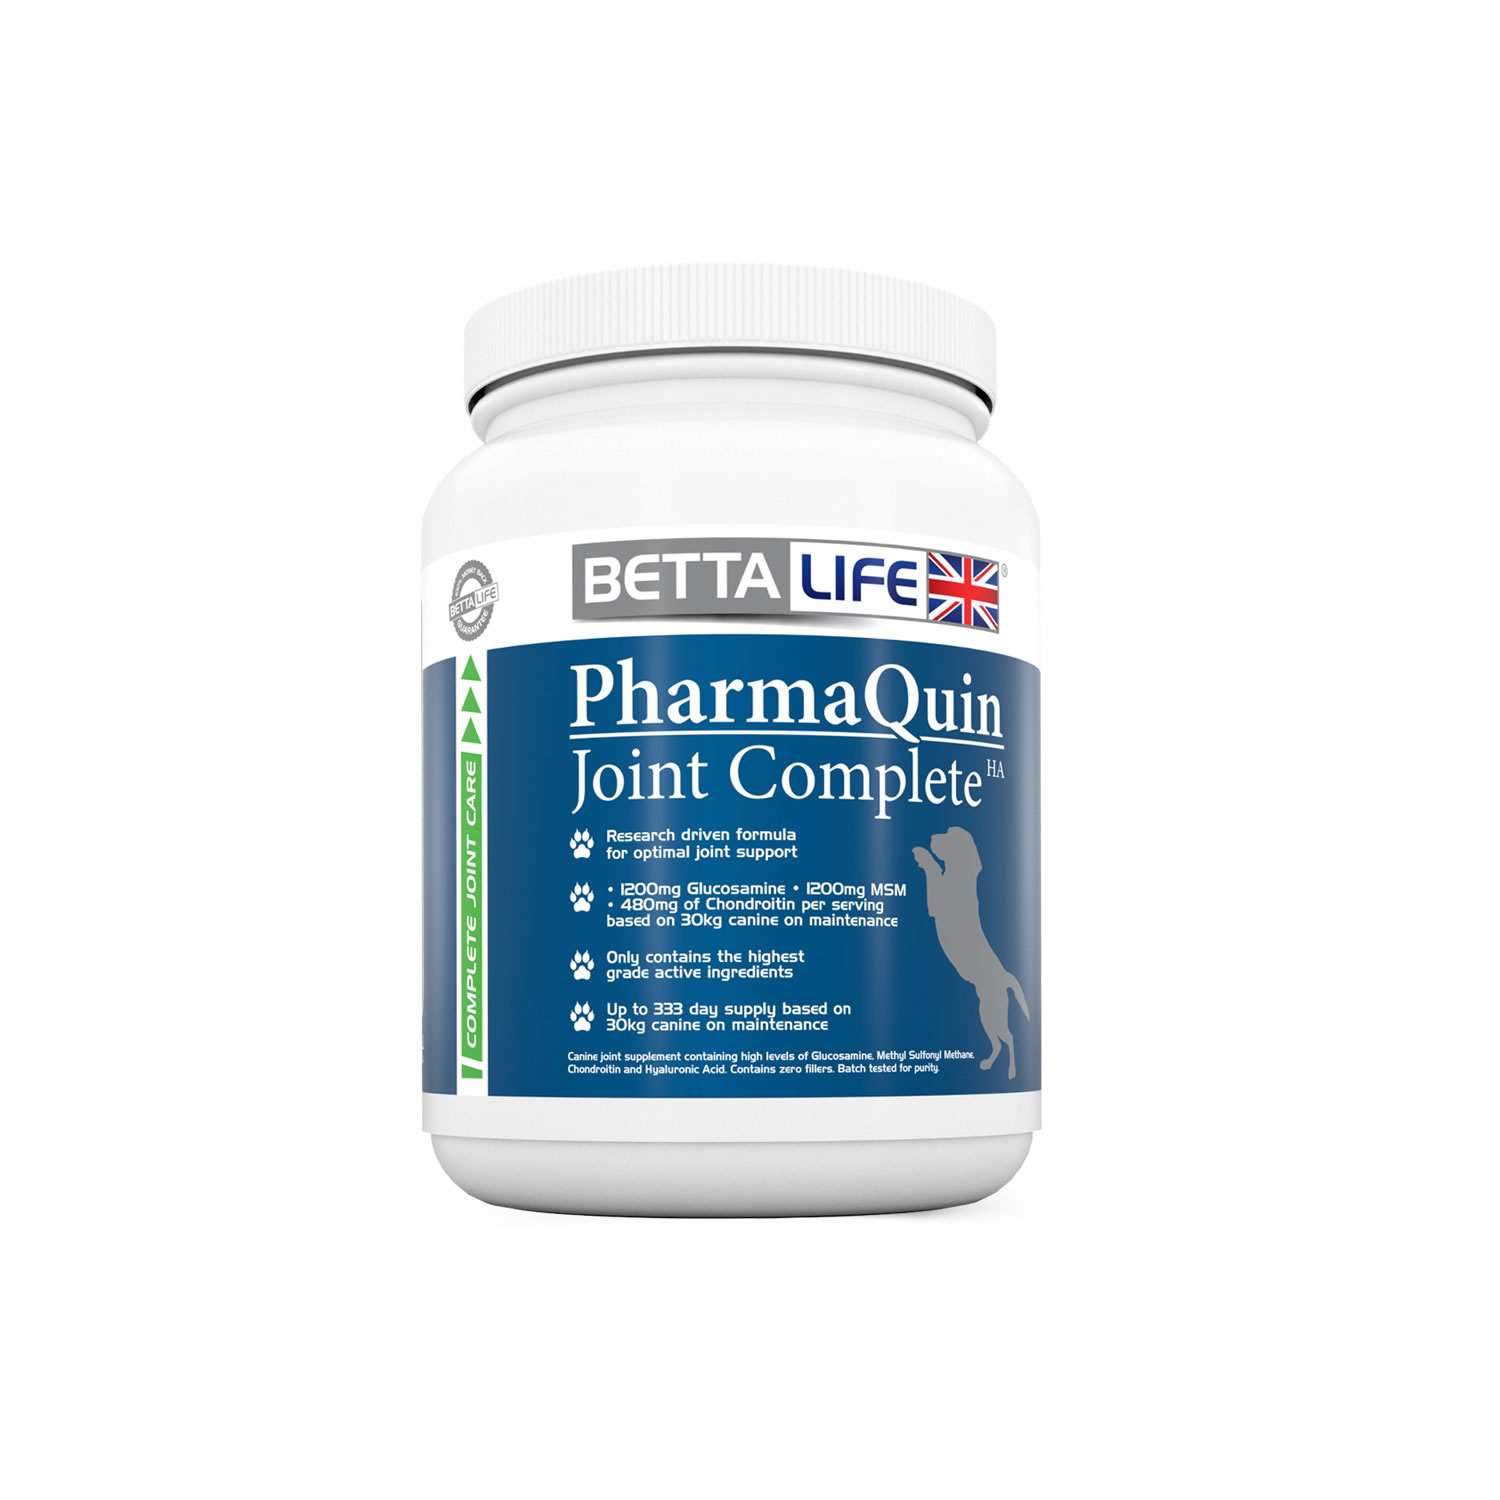 BETTALIFE PHARMAQUIN JOINT COMPLETE HA CANINE 1 KG